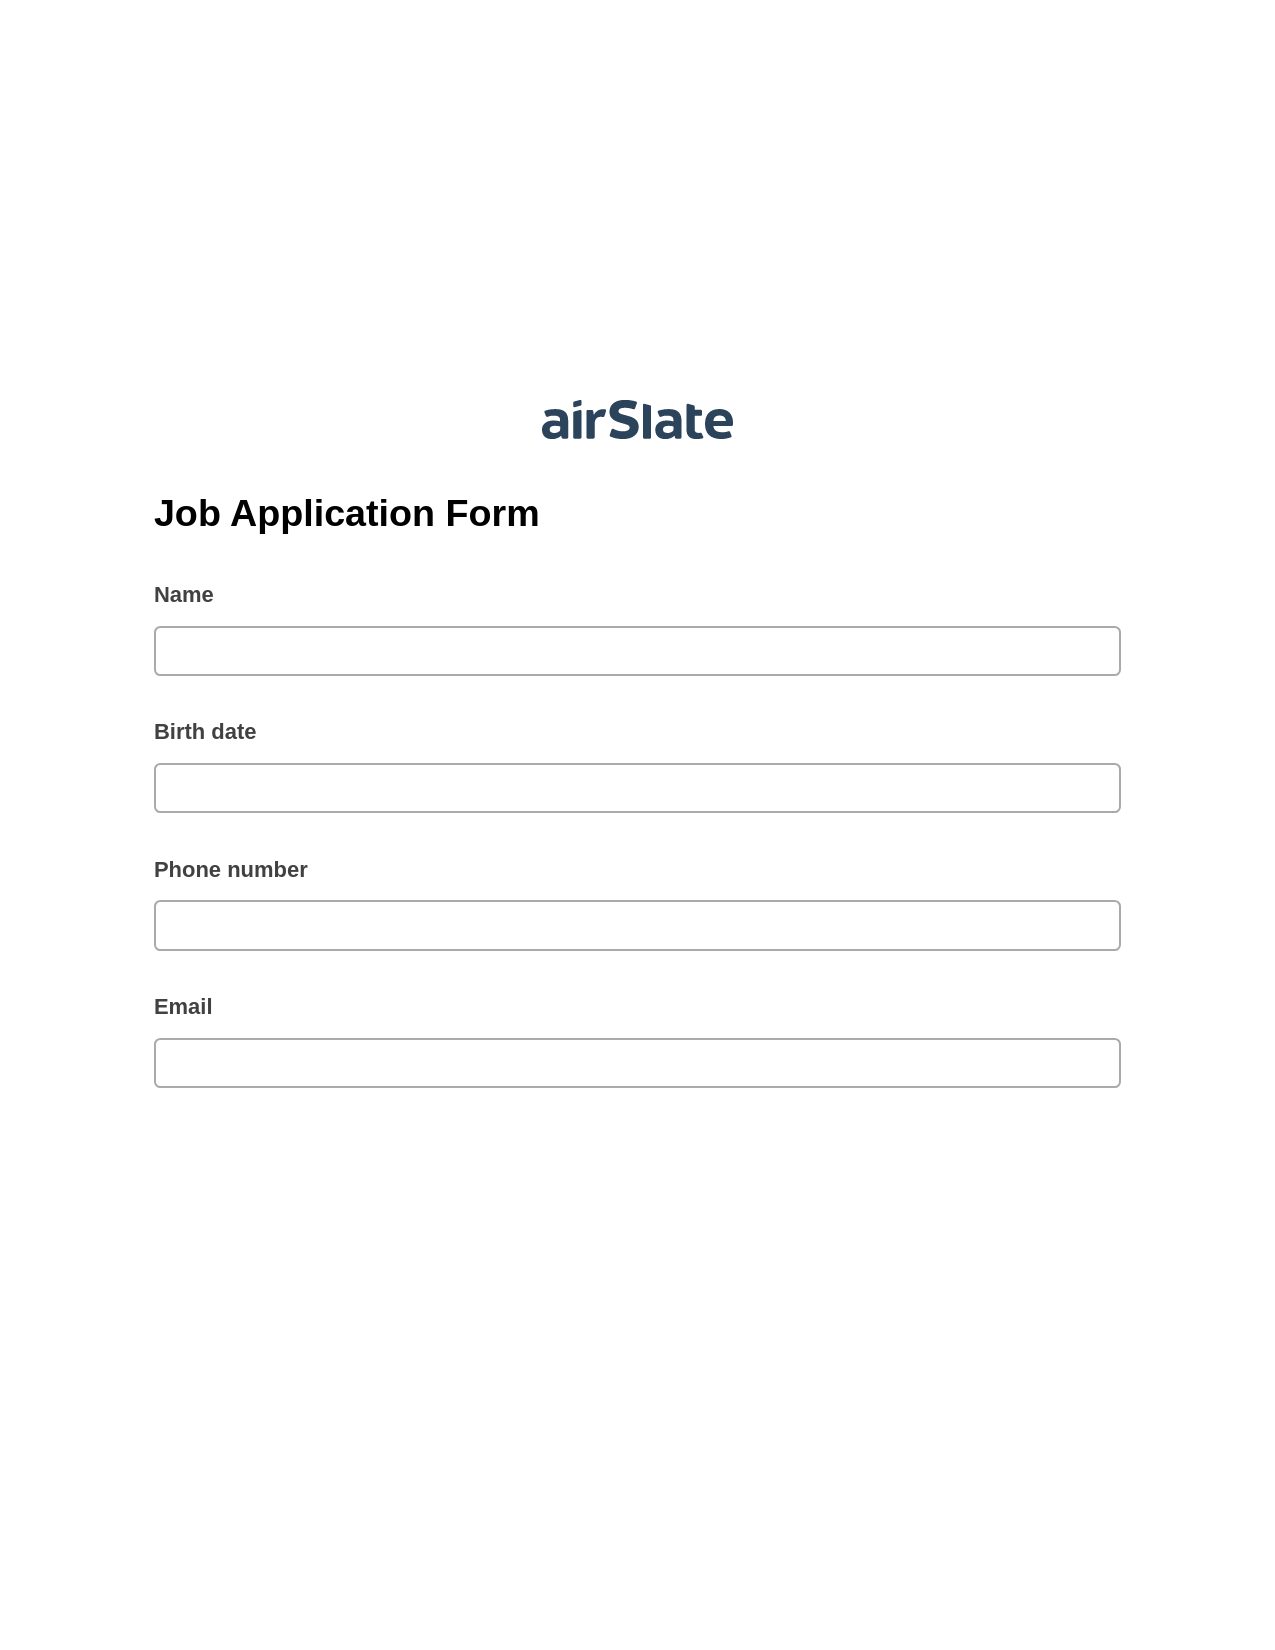 Job Application Form Pre-fill from Google Sheets Bot, Pre-fill with Custom Data Bot, Export to Excel 365 Bot